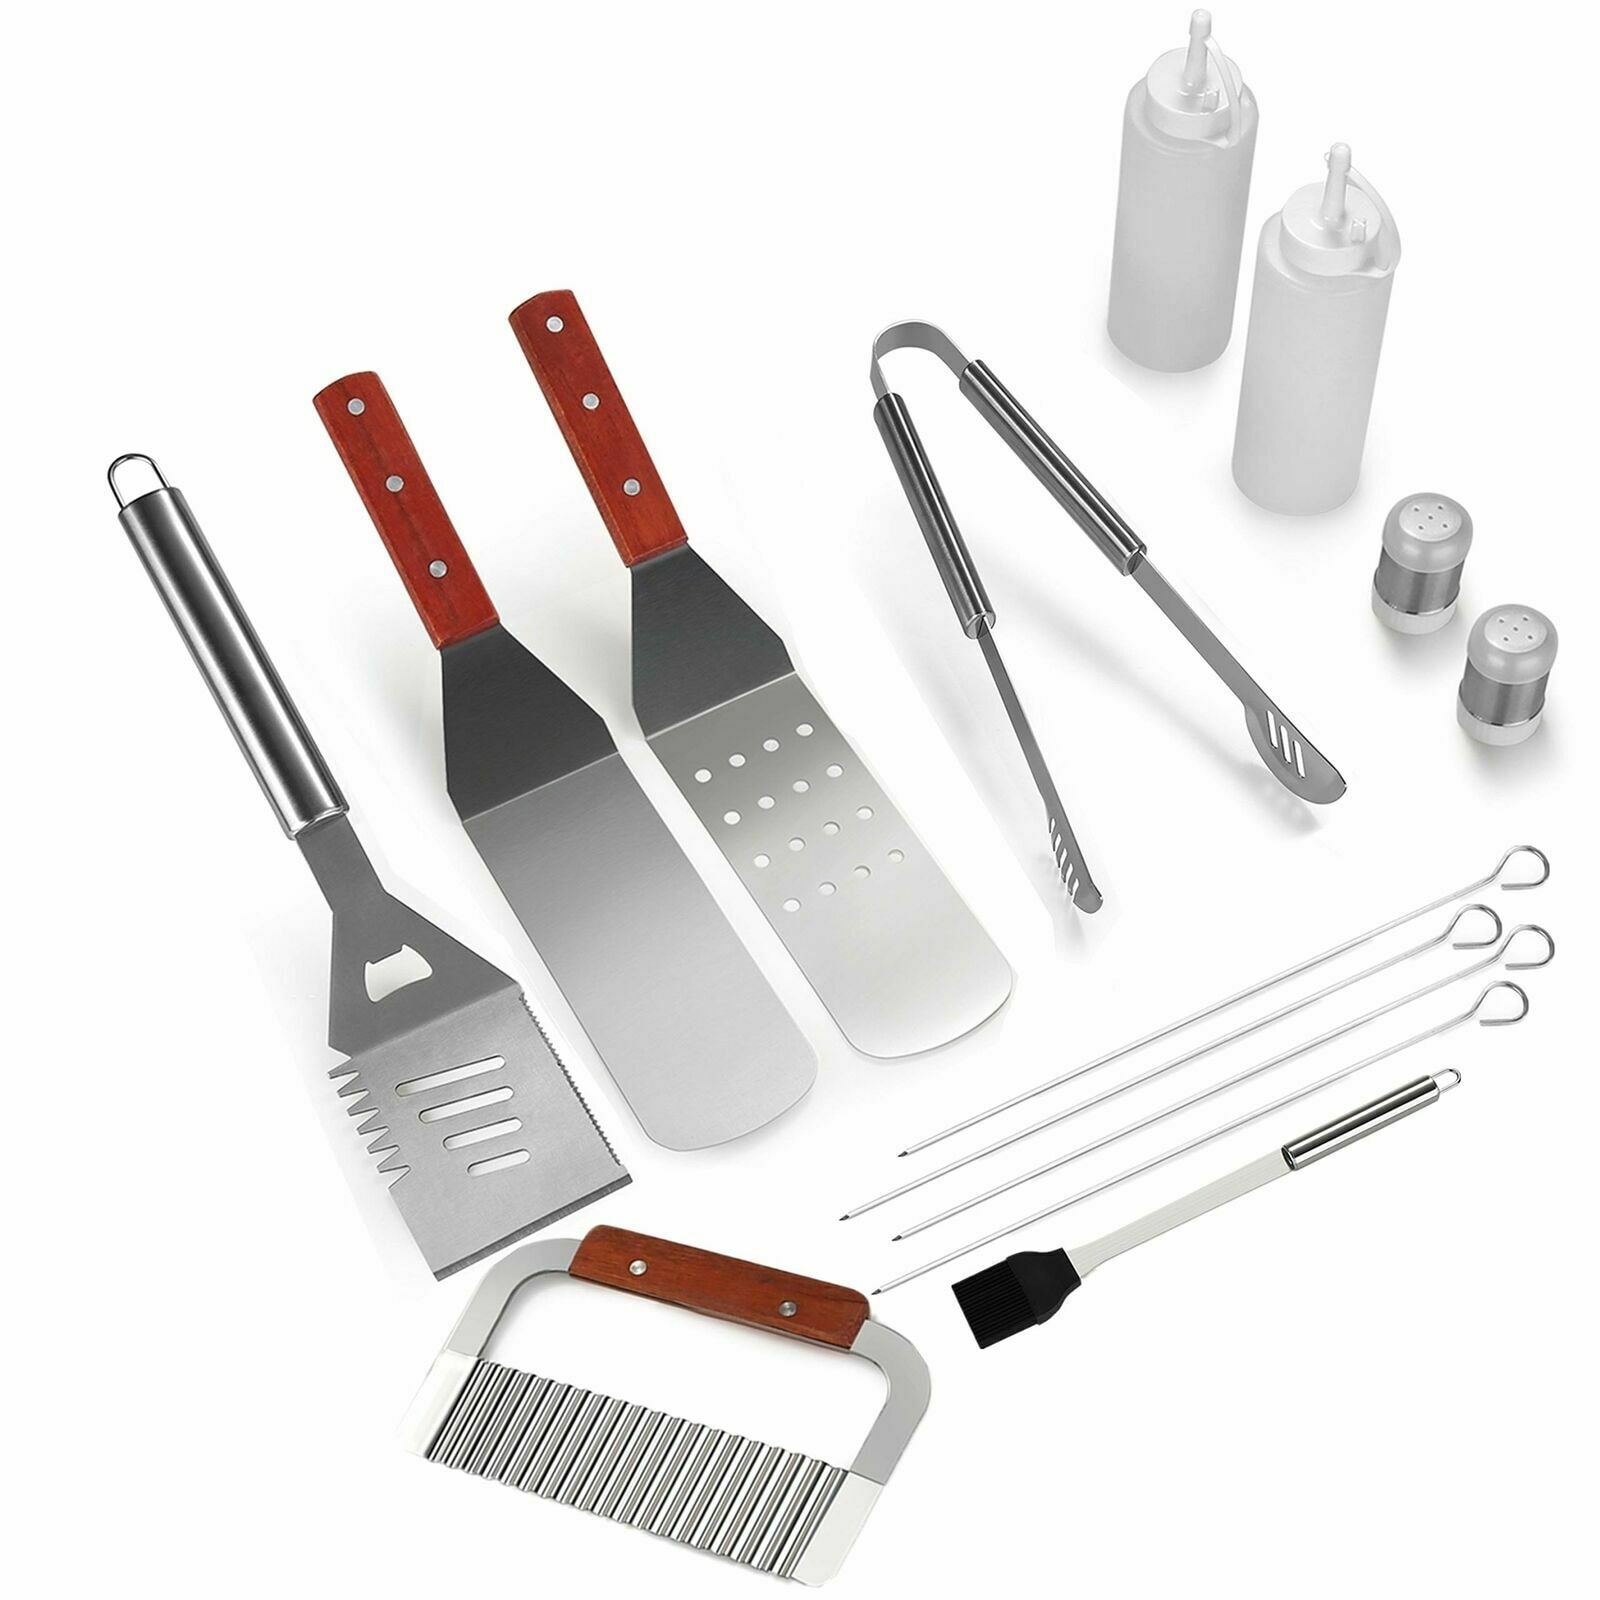 https://ak1.ostkcdn.com/images/products/is/images/direct/24499d0241eaf8a7ebb6522f3c74eb7cfaf37dc4/BBQ-tool-sets-%2C-BBQ-tool-Grilling-Accessories-Flat-Top-Stainless-Steel-Spatulas-Barbecue-Kit.jpg